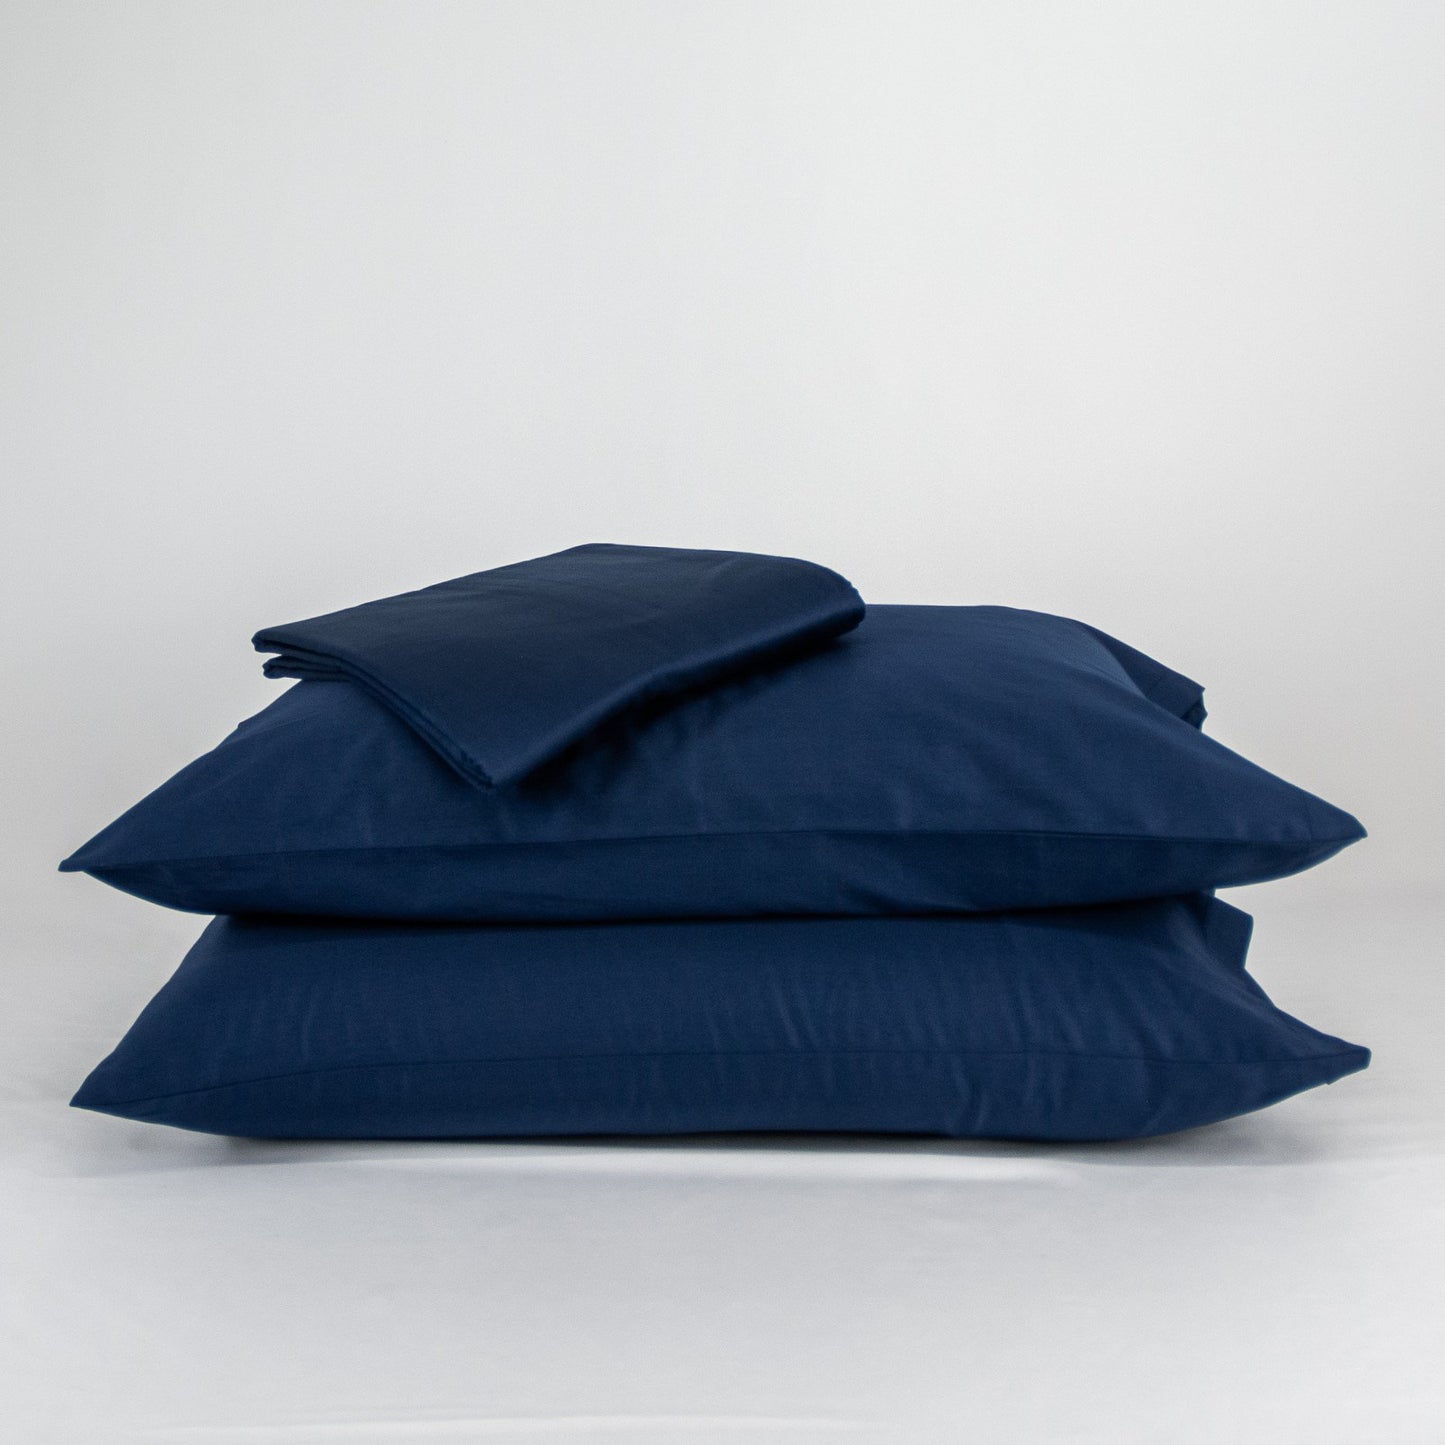 Stacked organic cotton pillowcases and sheets in classic blue